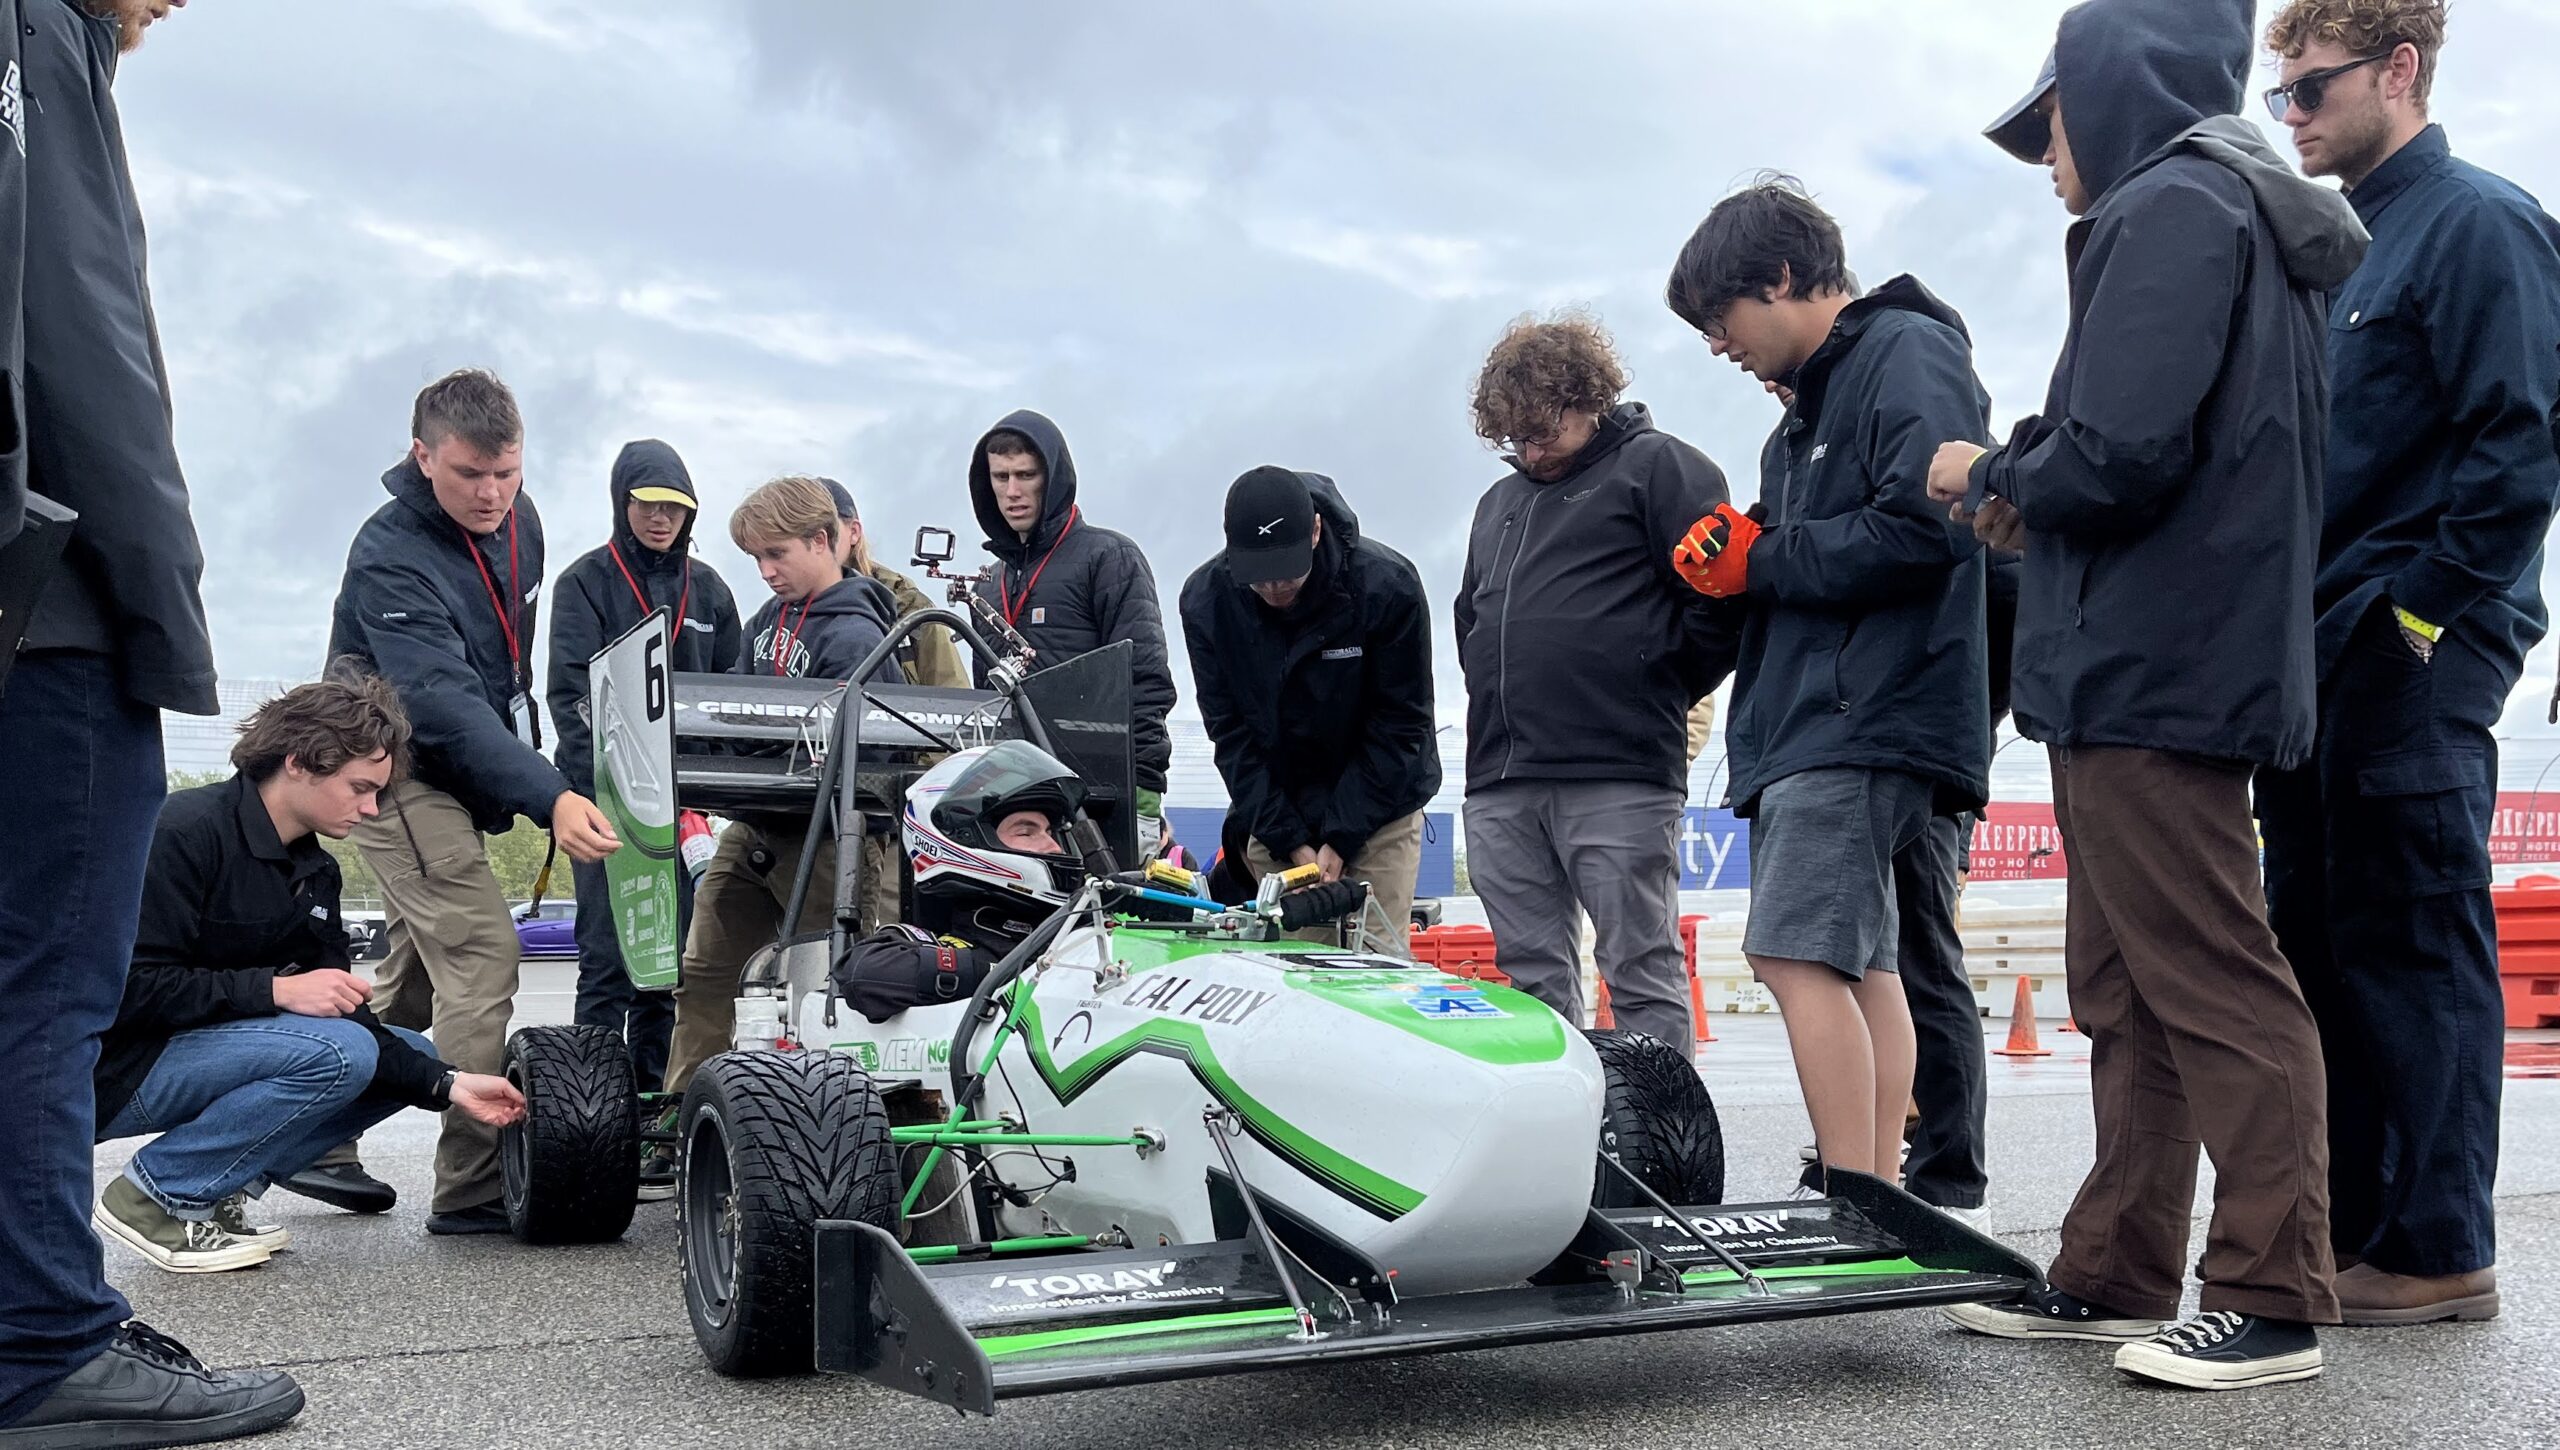 Crew members prep the Formula car for competition